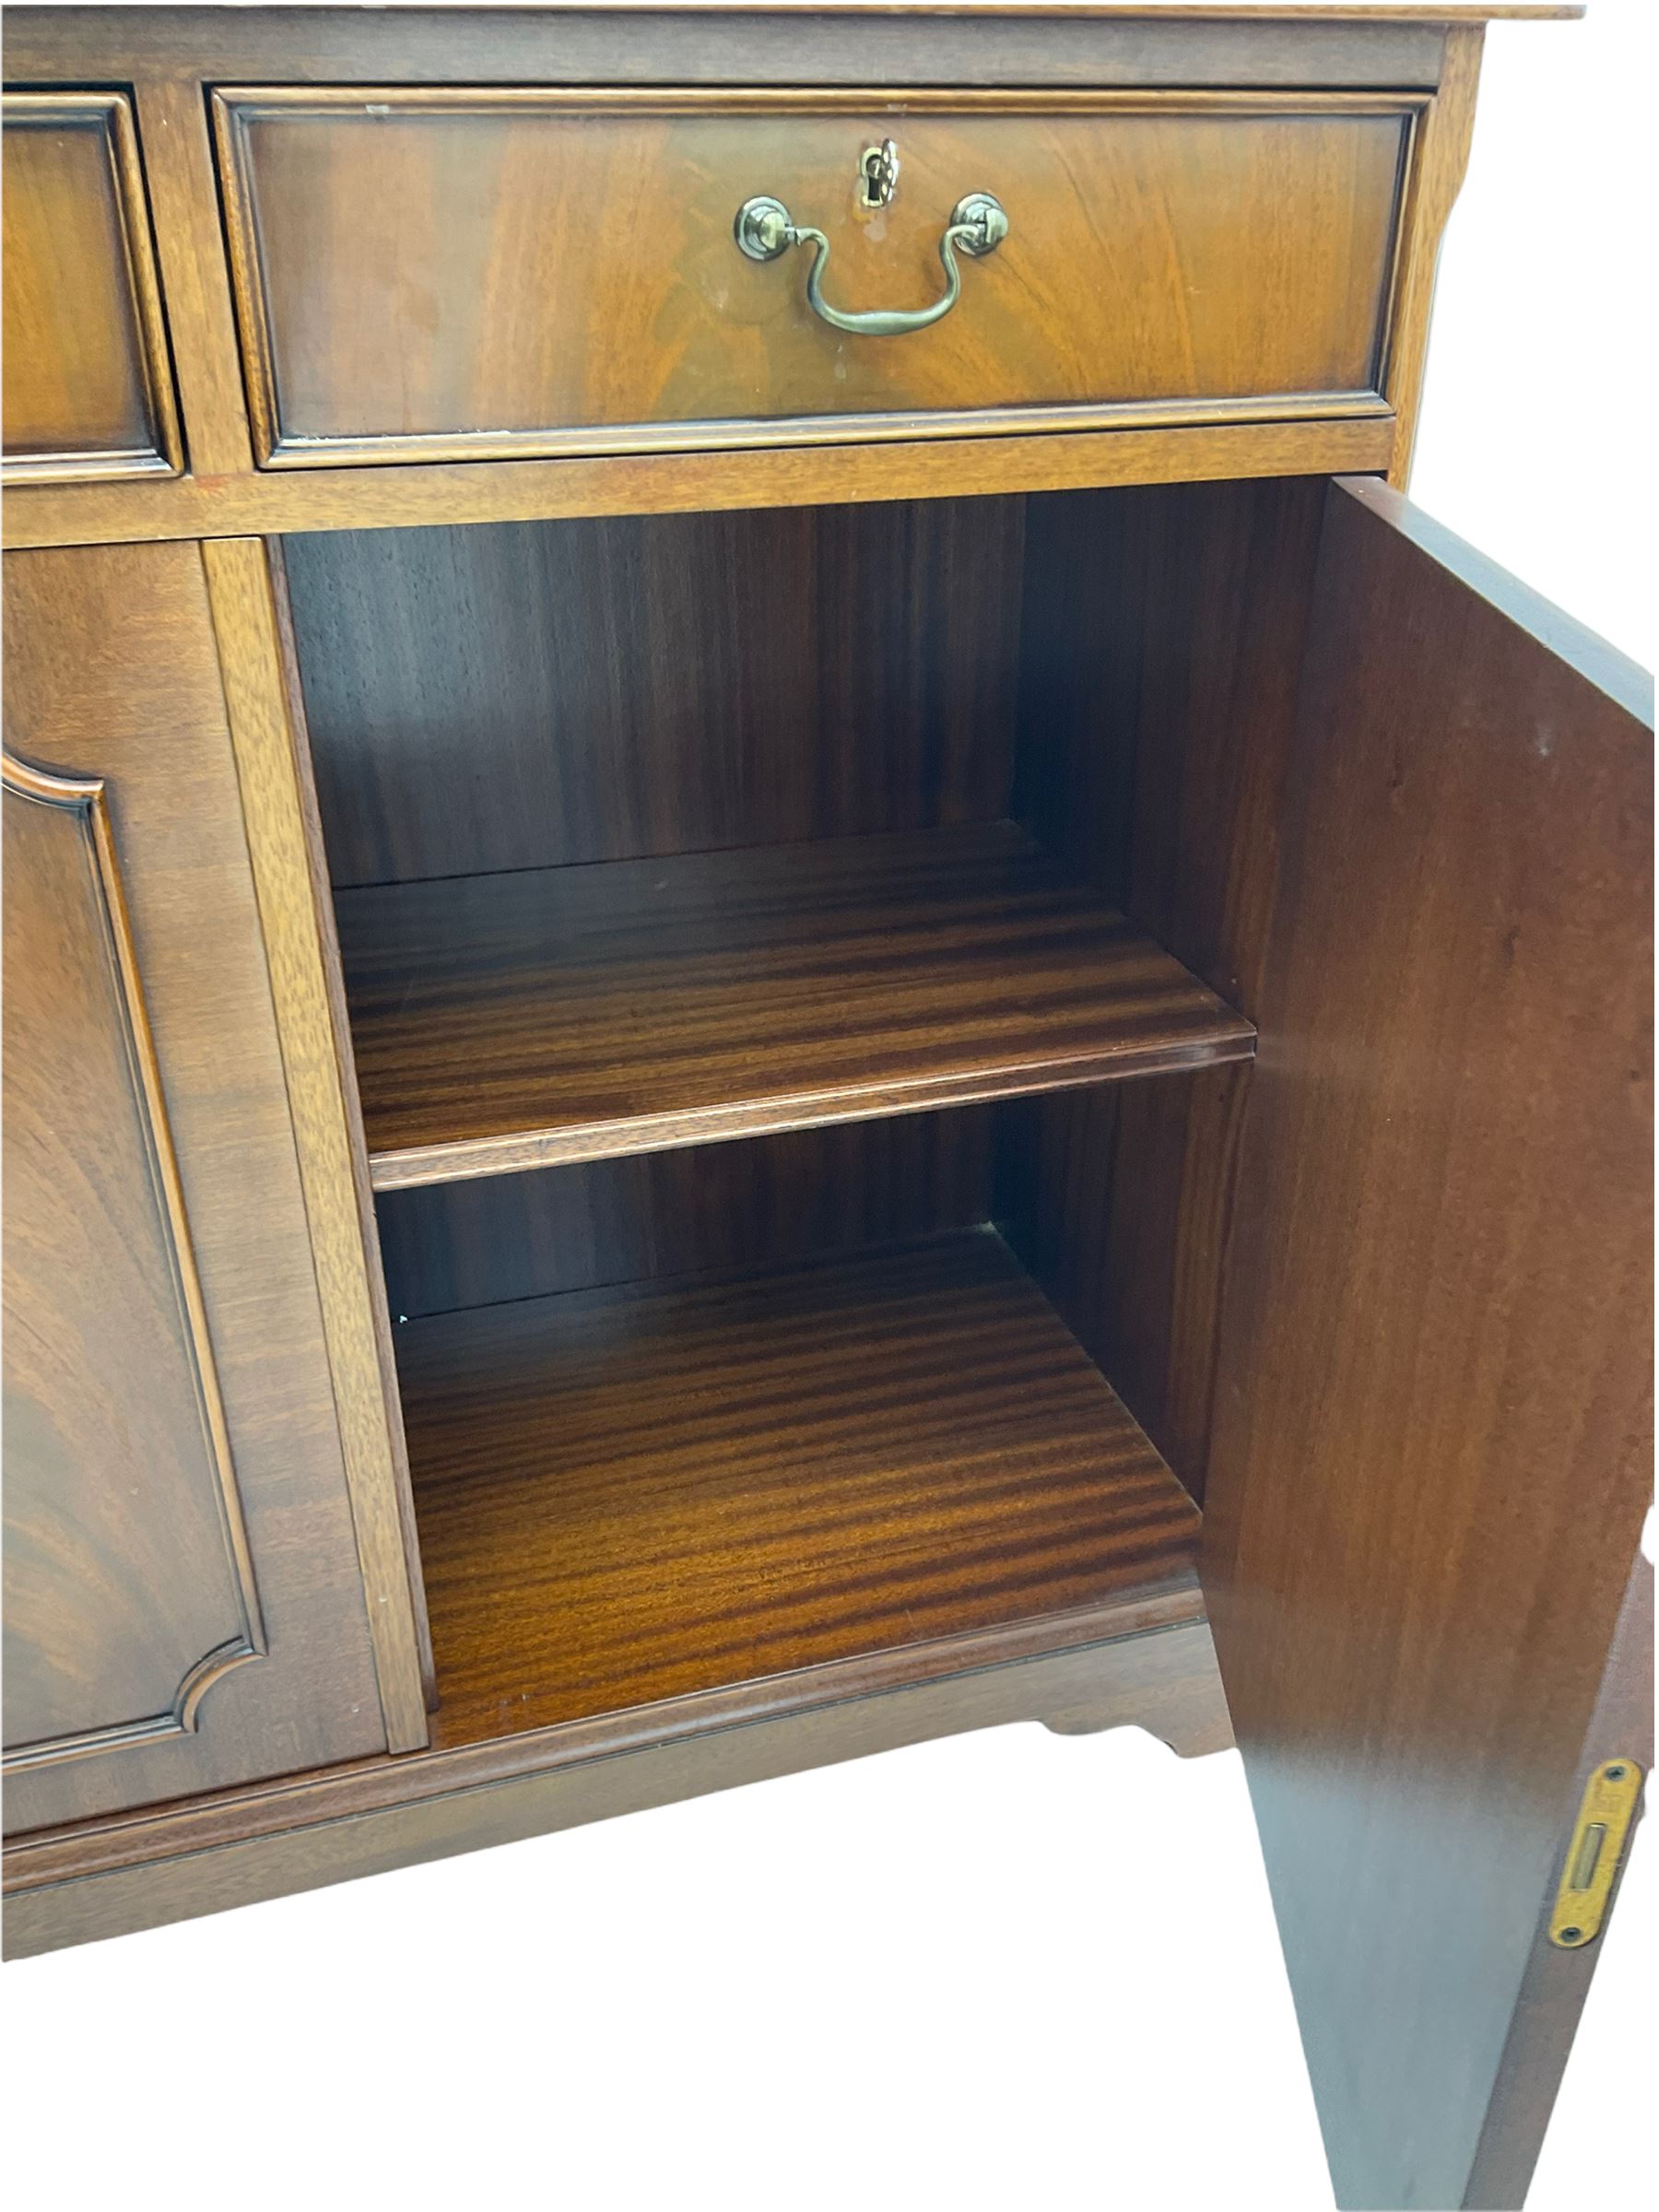 Reproduction mahogany side cabinet - Image 4 of 6